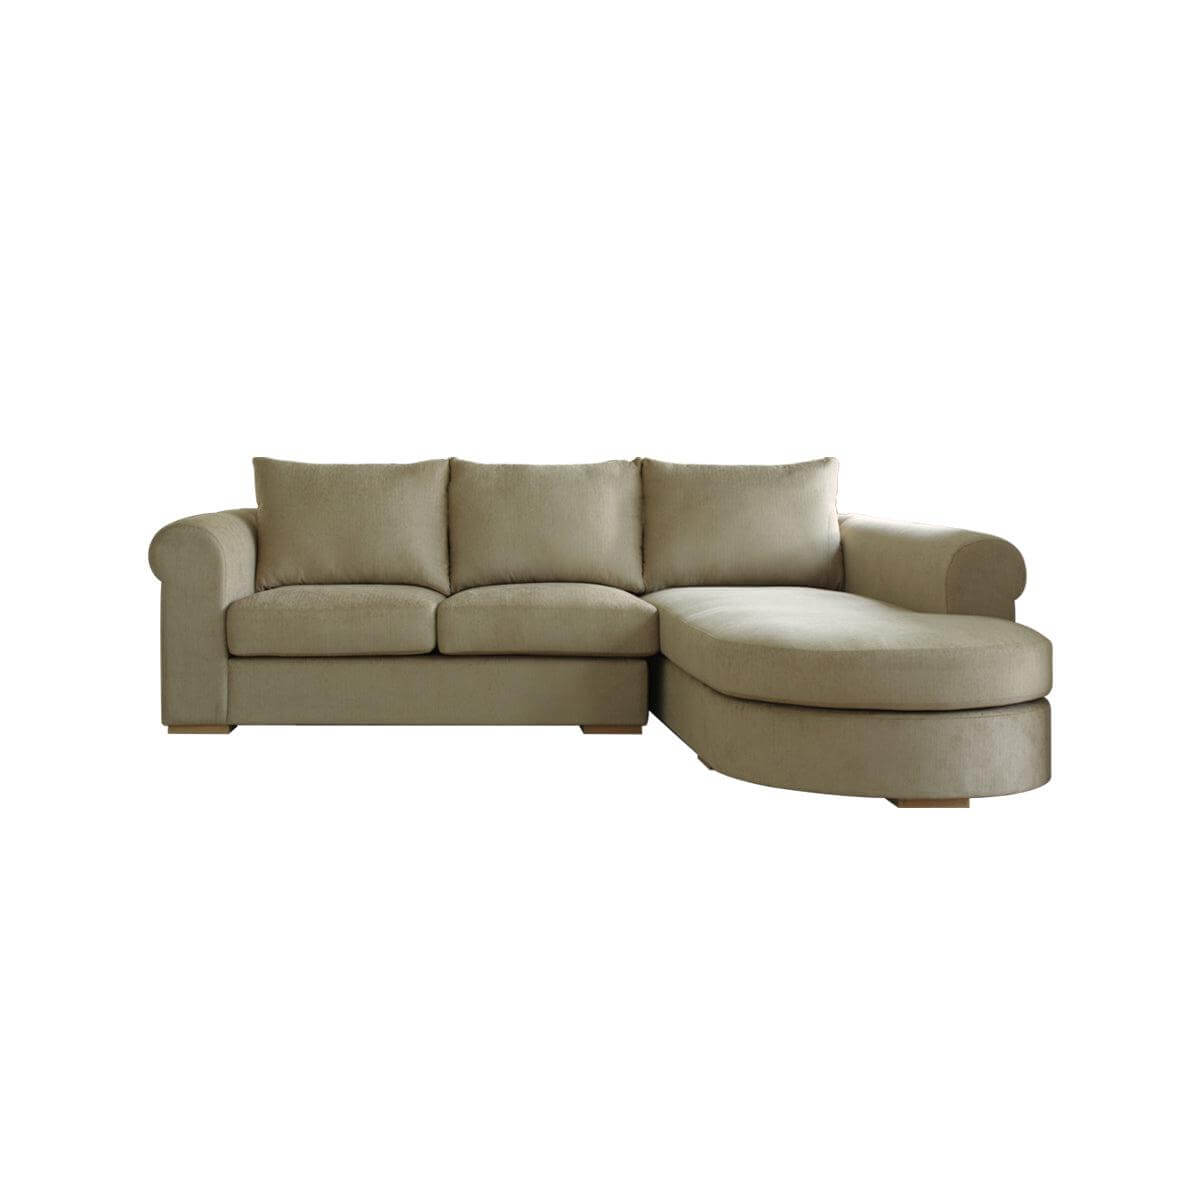 Tuscany L-Shape 2-Seat Sofa - classic look paired with modern 